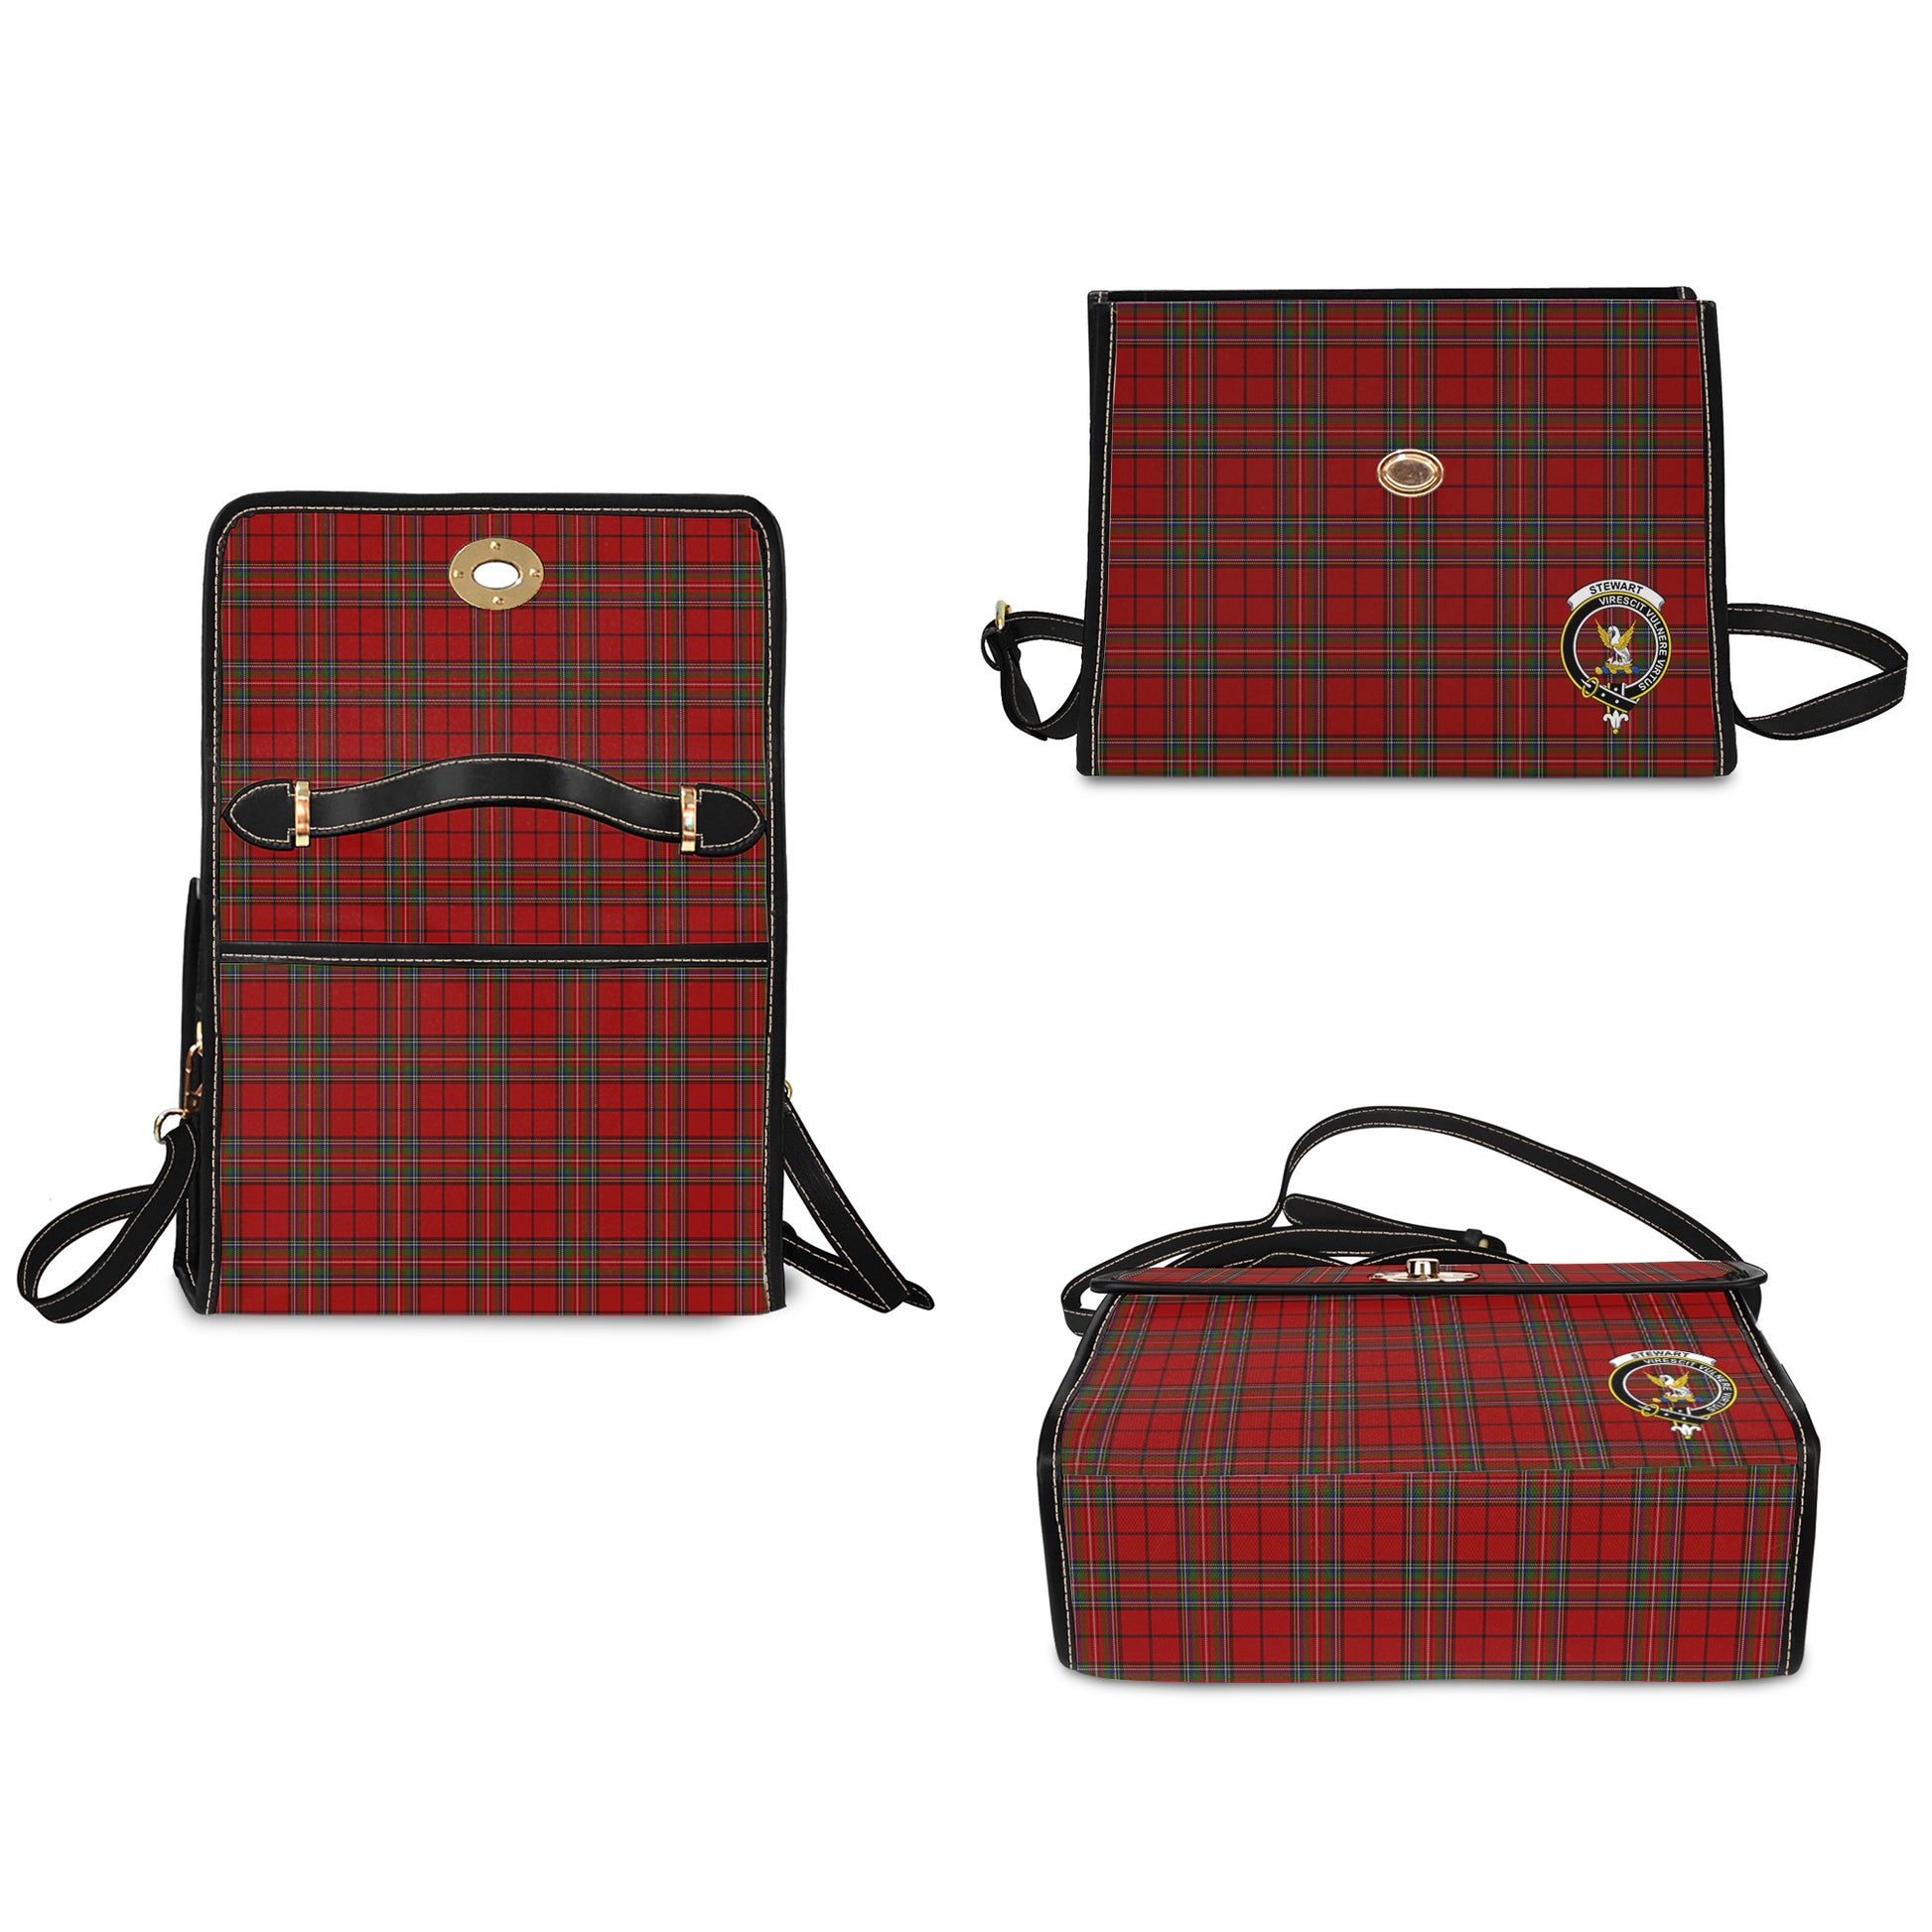 stewart-of-galloway-tartan-leather-strap-waterproof-canvas-bag-with-family-crest